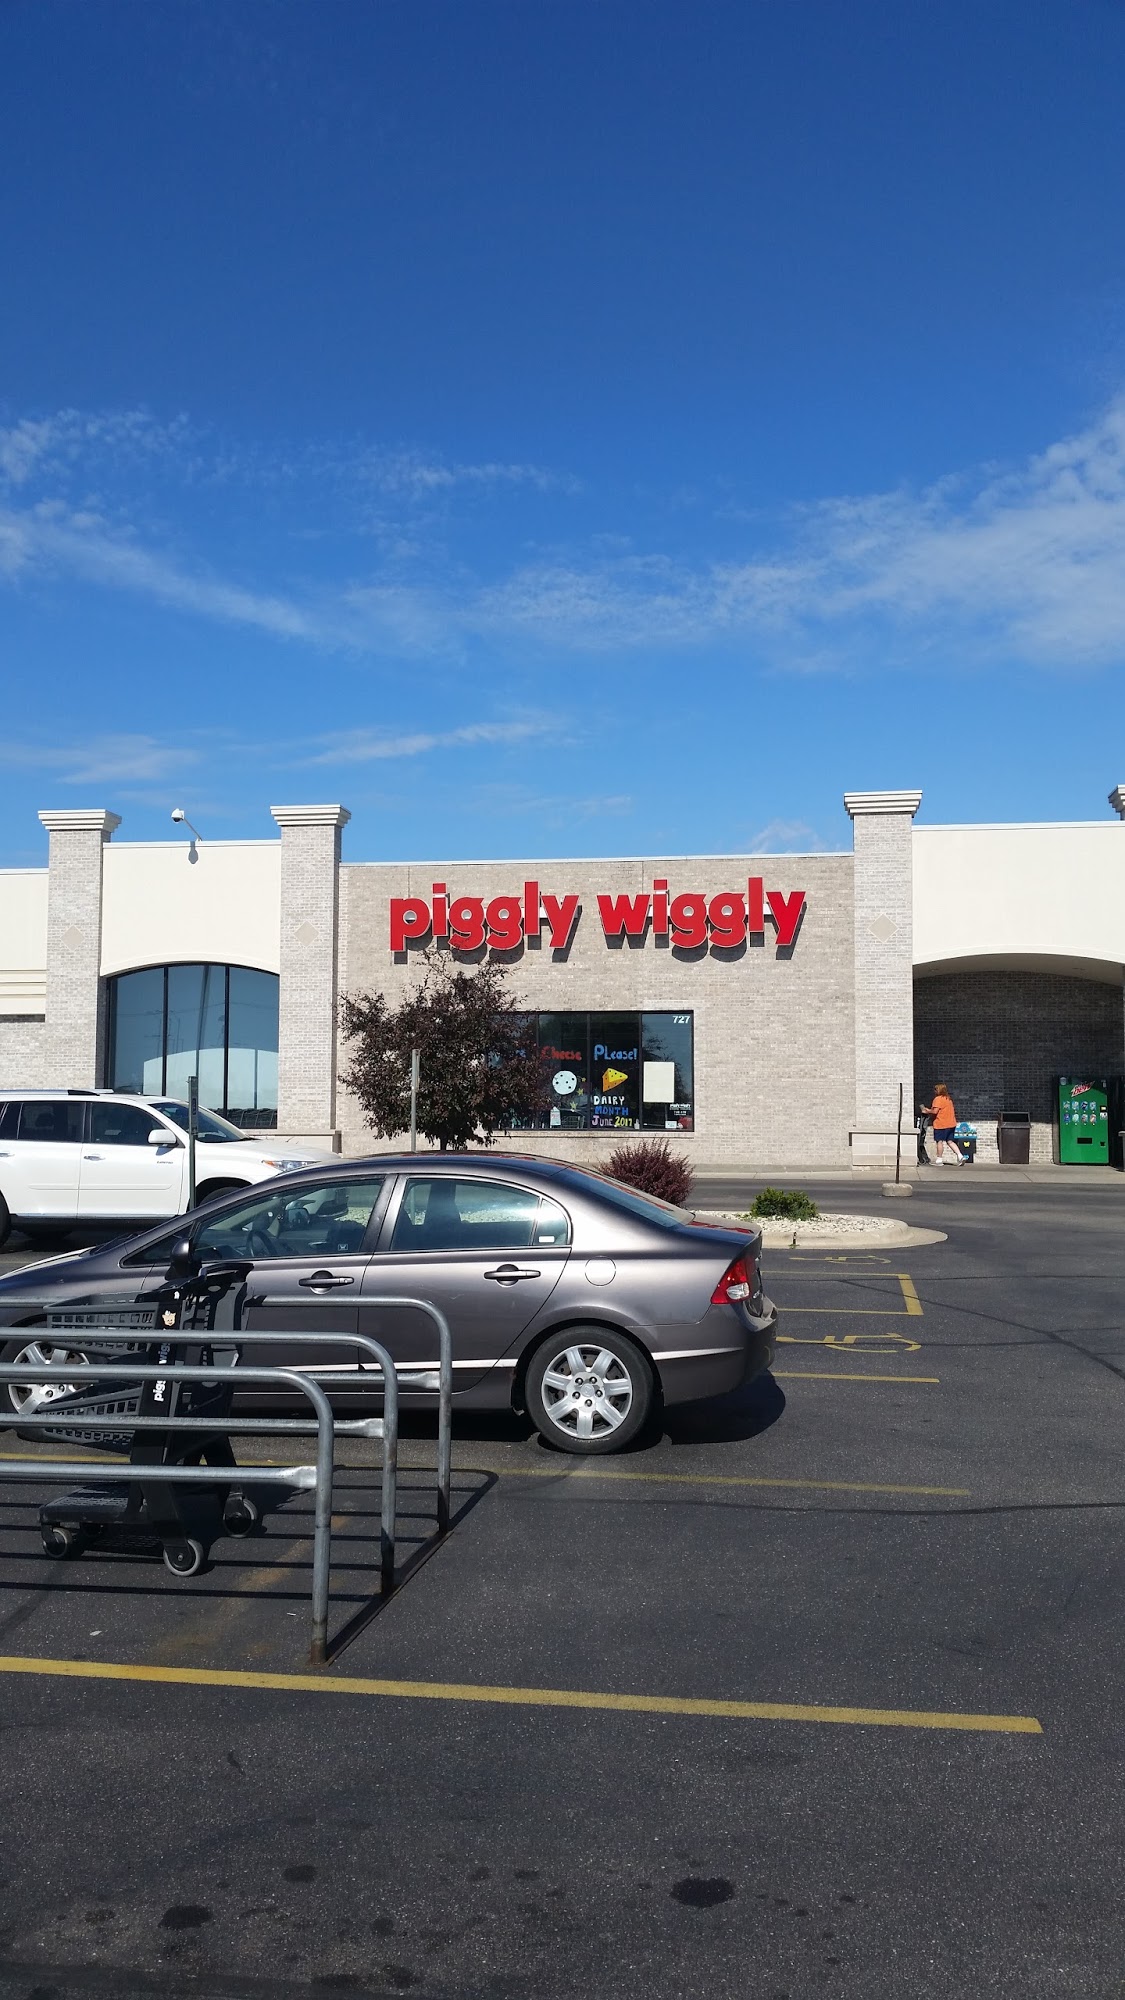 Cowley's Piggly Wiggly